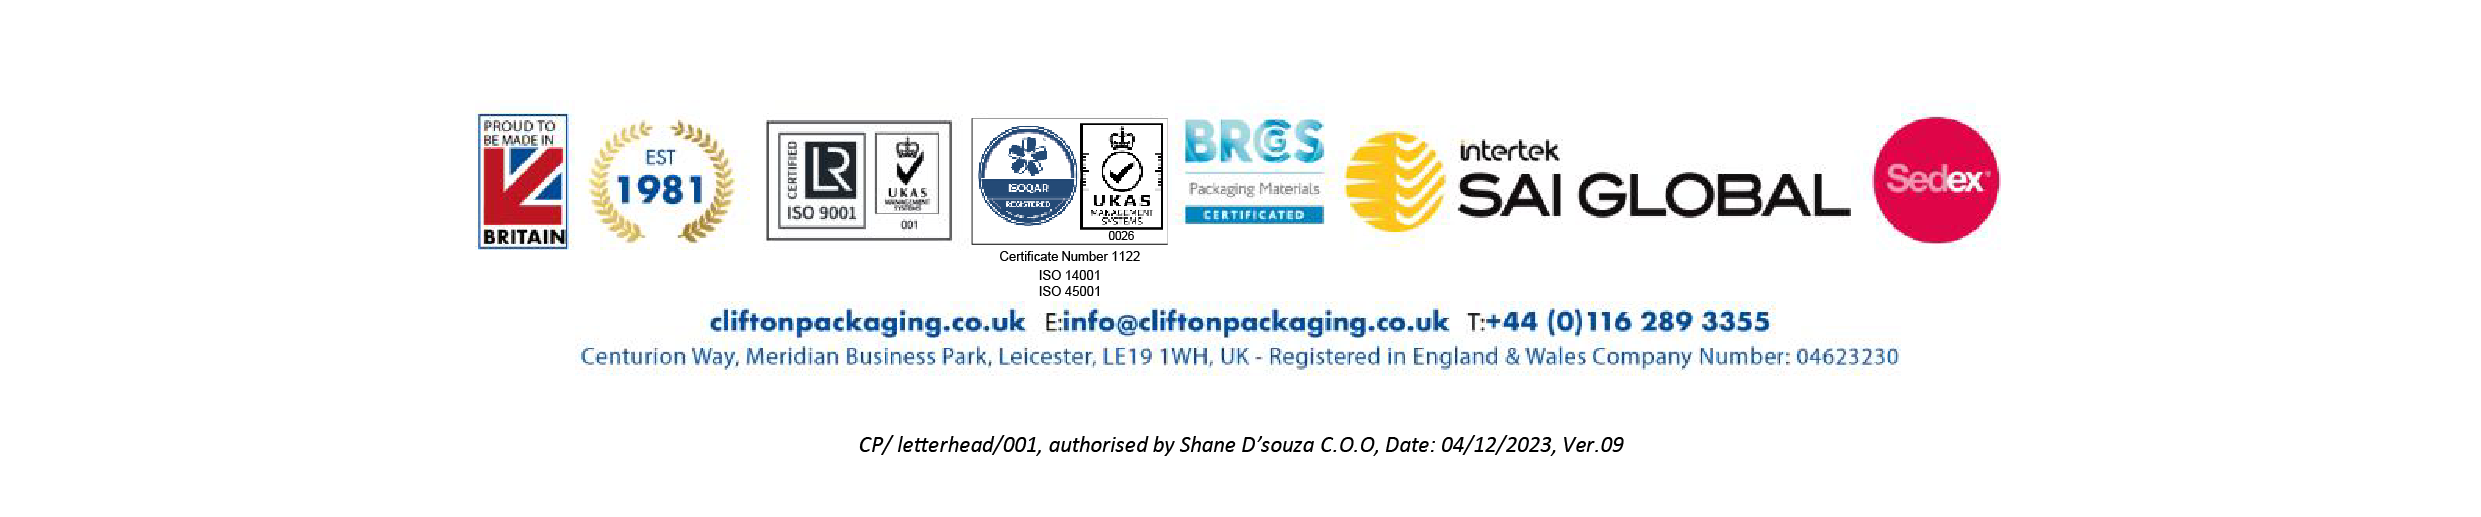 Accreditation's. Clifton Packaging Group Ltd.